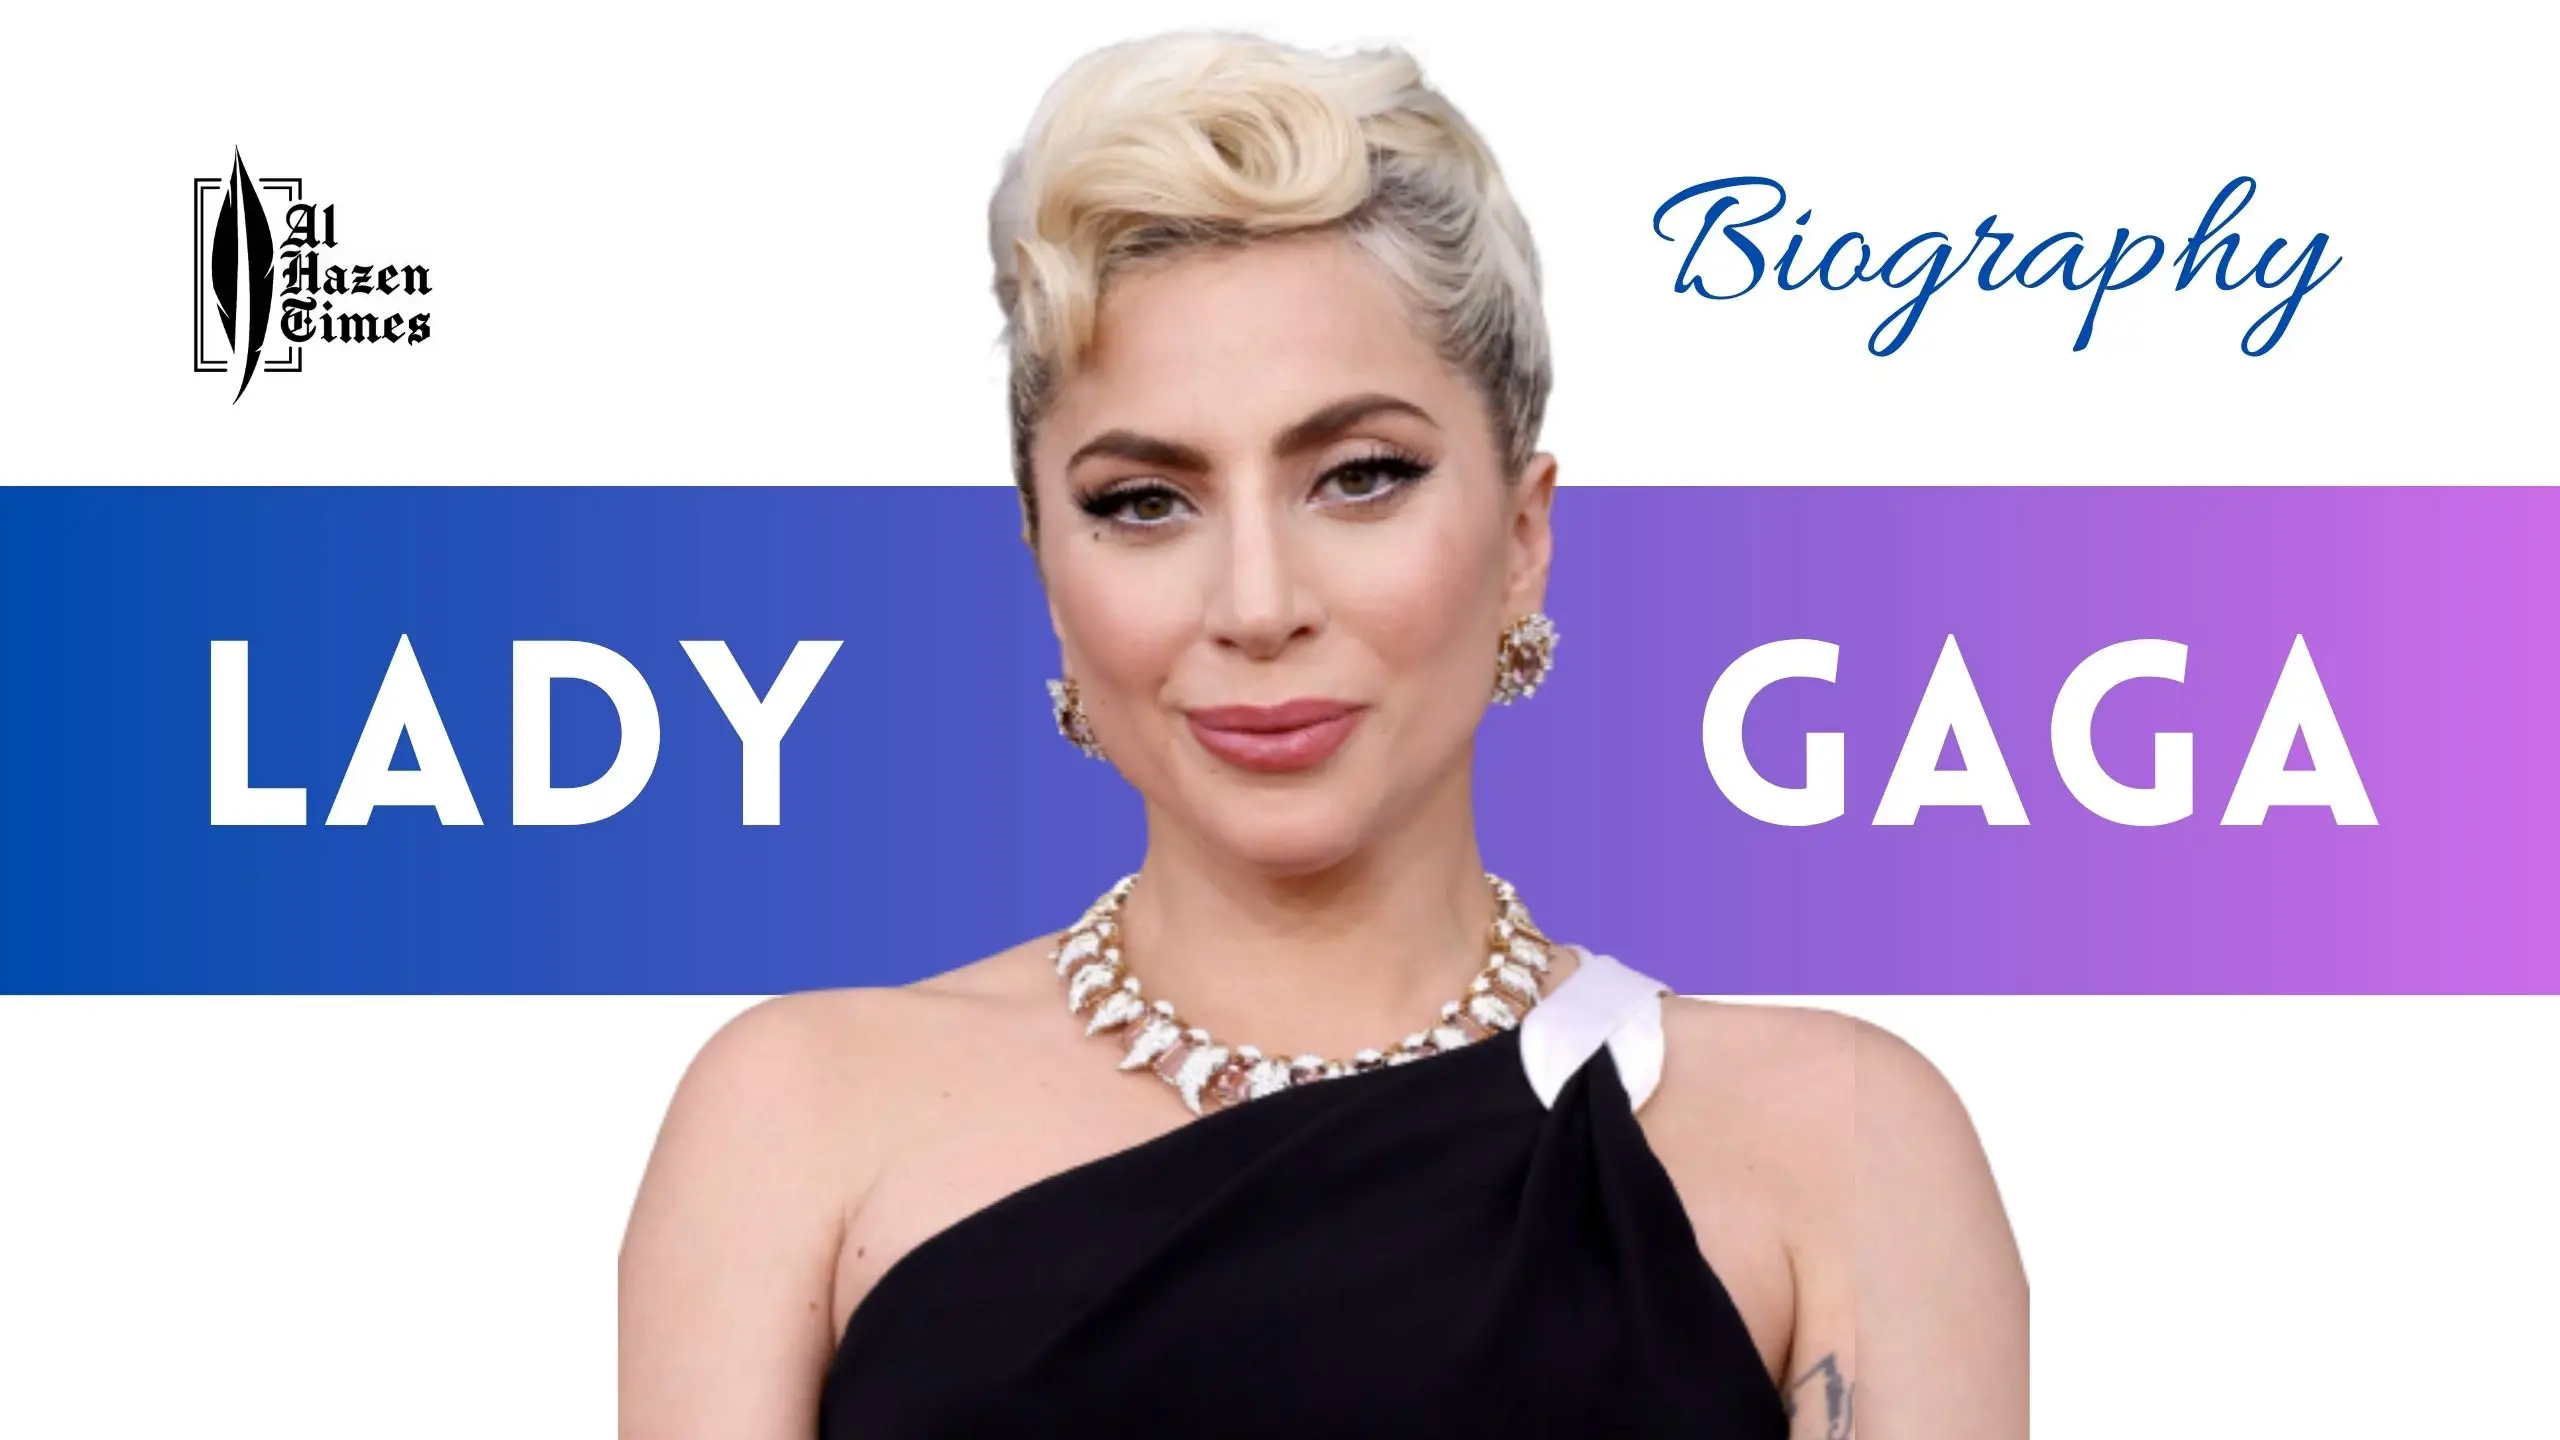 Lady Gaga Biography_ The Iconic Journеy of an American Singеr-Songwritеr